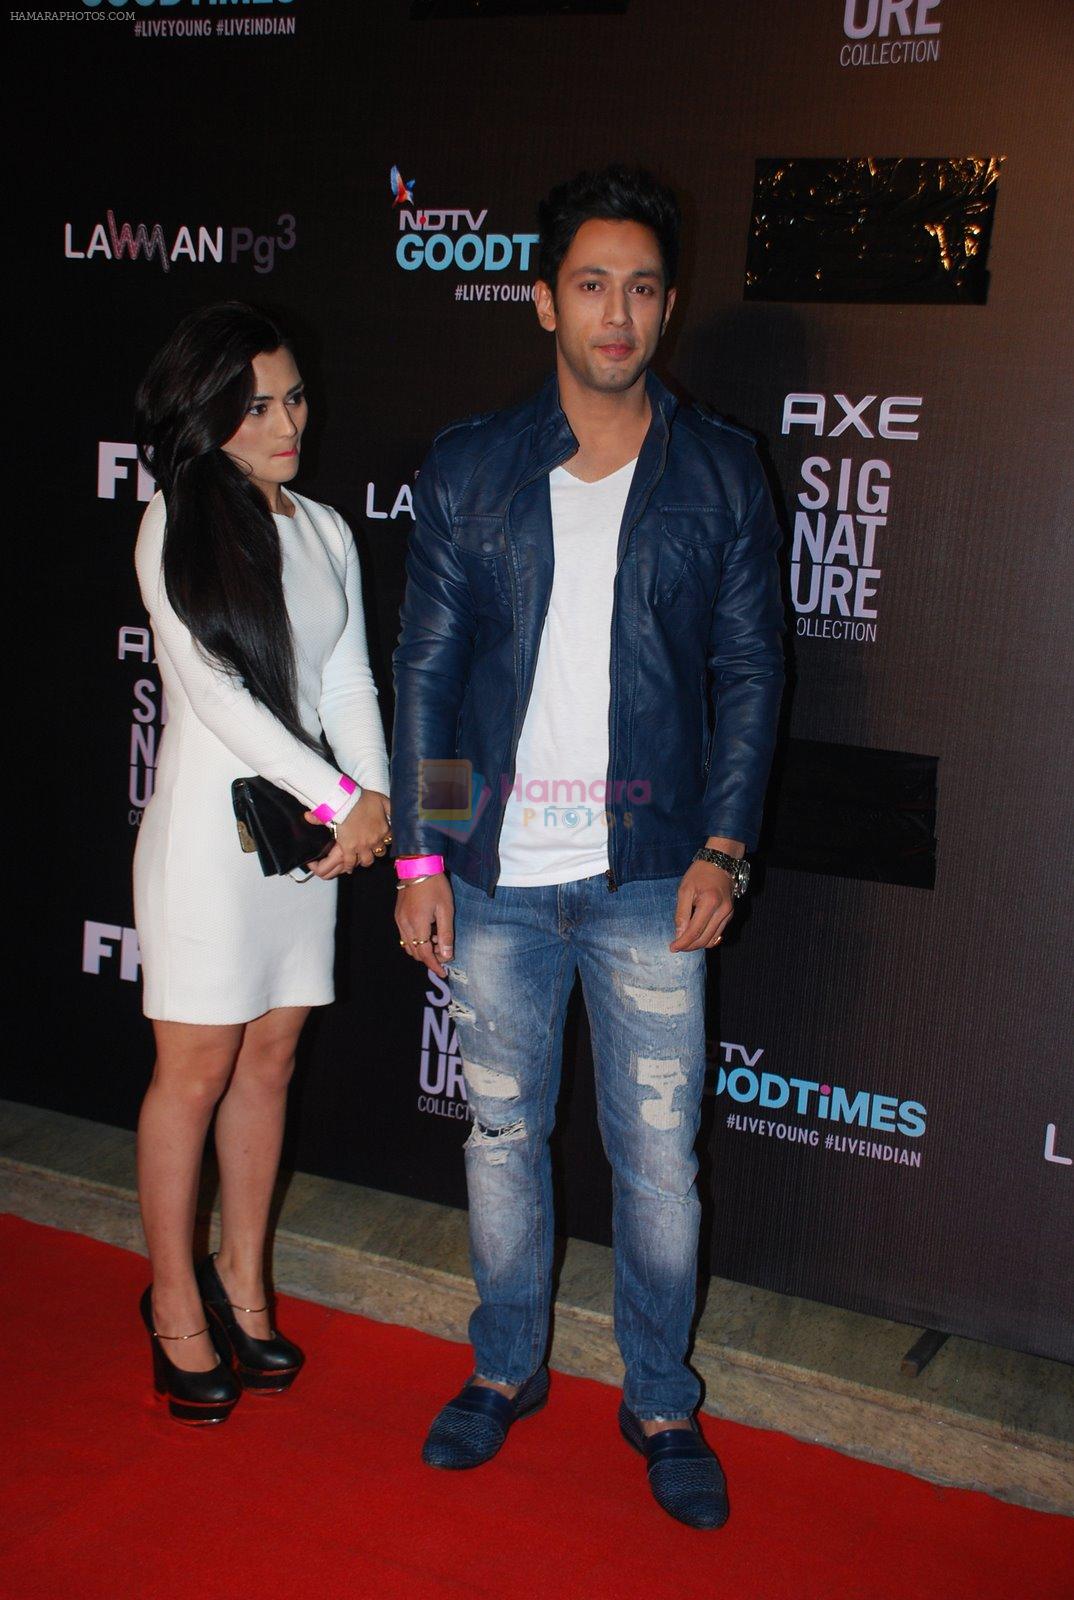 at Fhm bachelor of the year bash in Hard Rock Cafe on 22nd Dec 2014